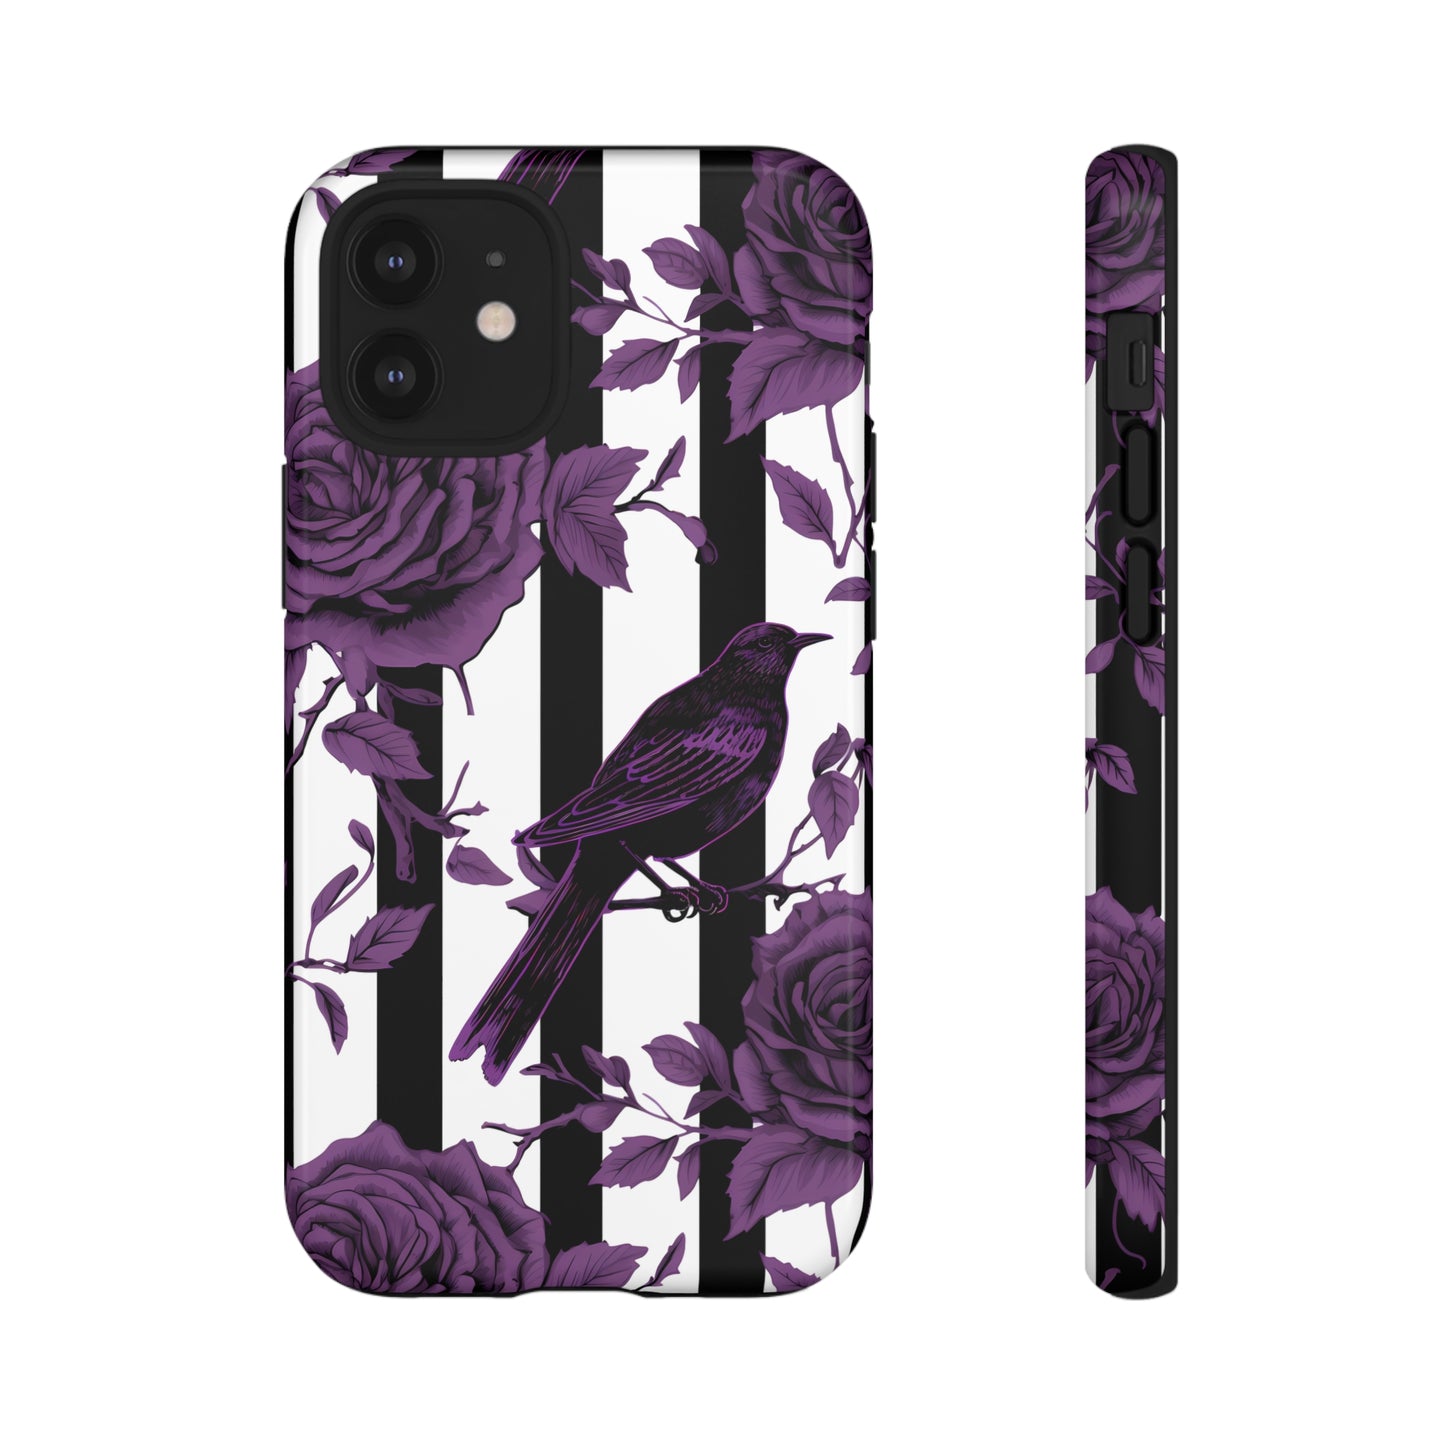 Striped Crows and Roses Tough Cases for iPhone Samsung Google PhonesPhone CaseVTZdesignsiPhone 12 MiniGlossyAccessoriescrowsGlossy